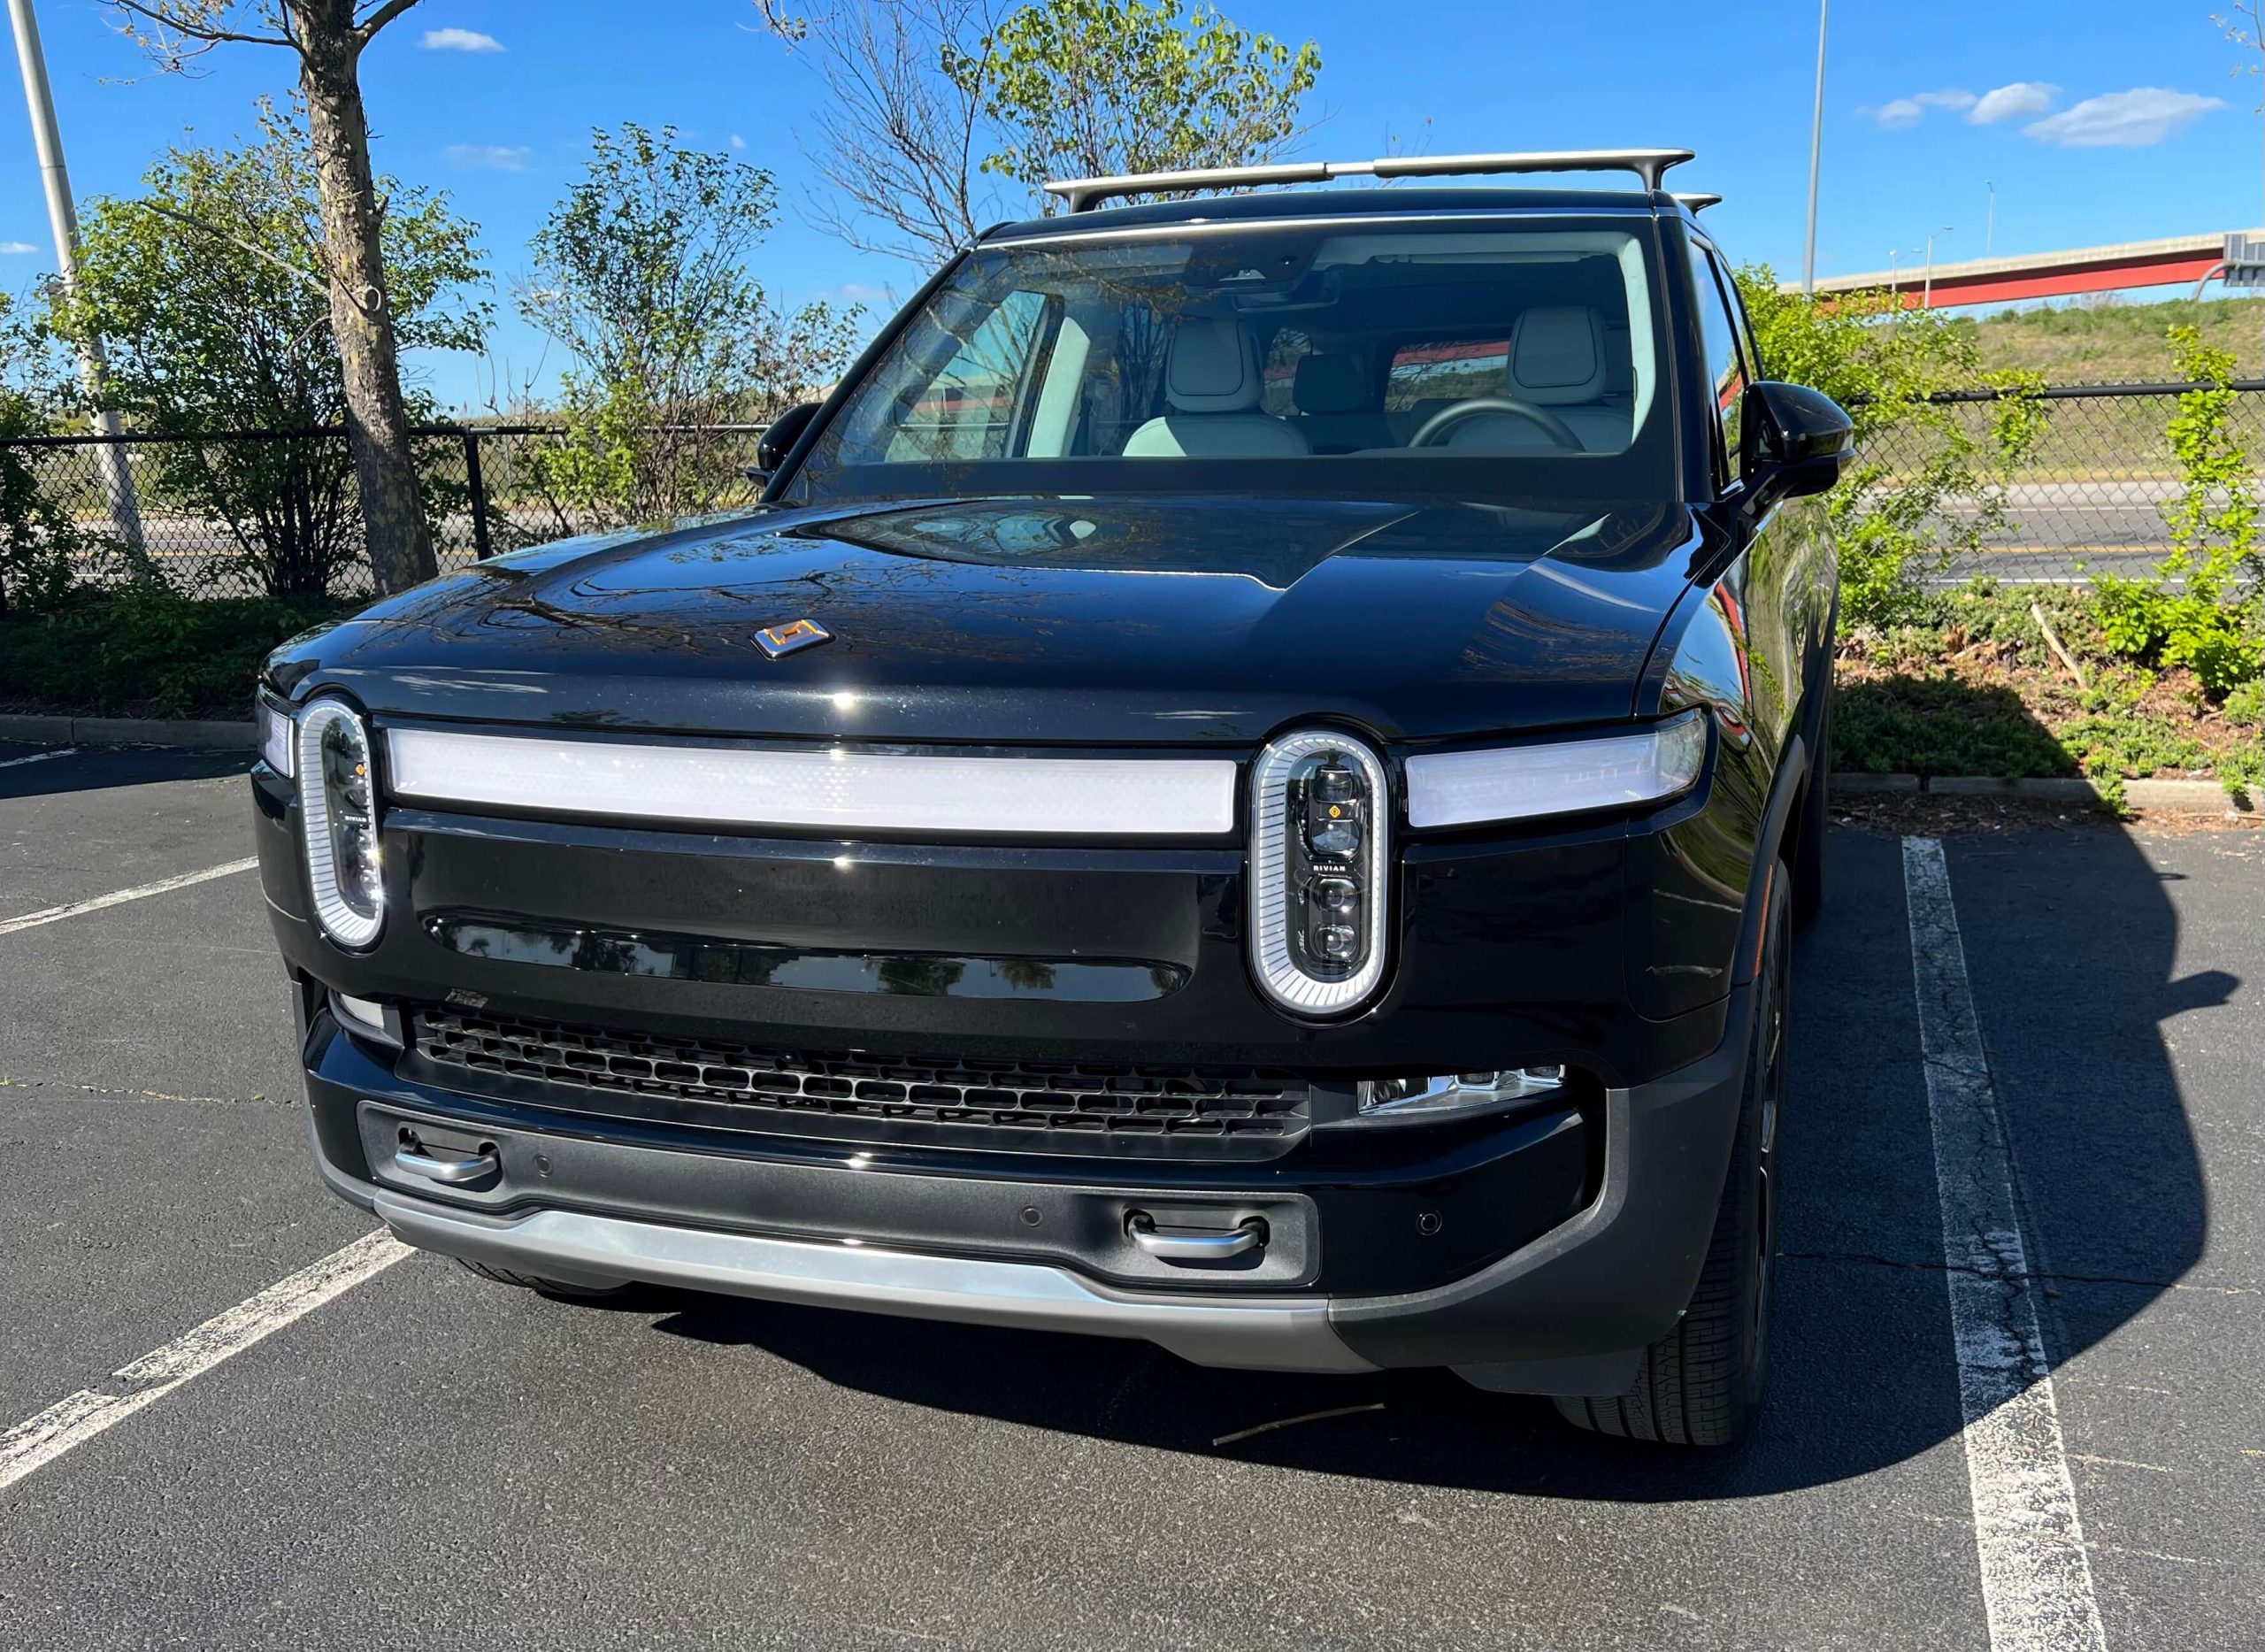 Rivian R1S front view